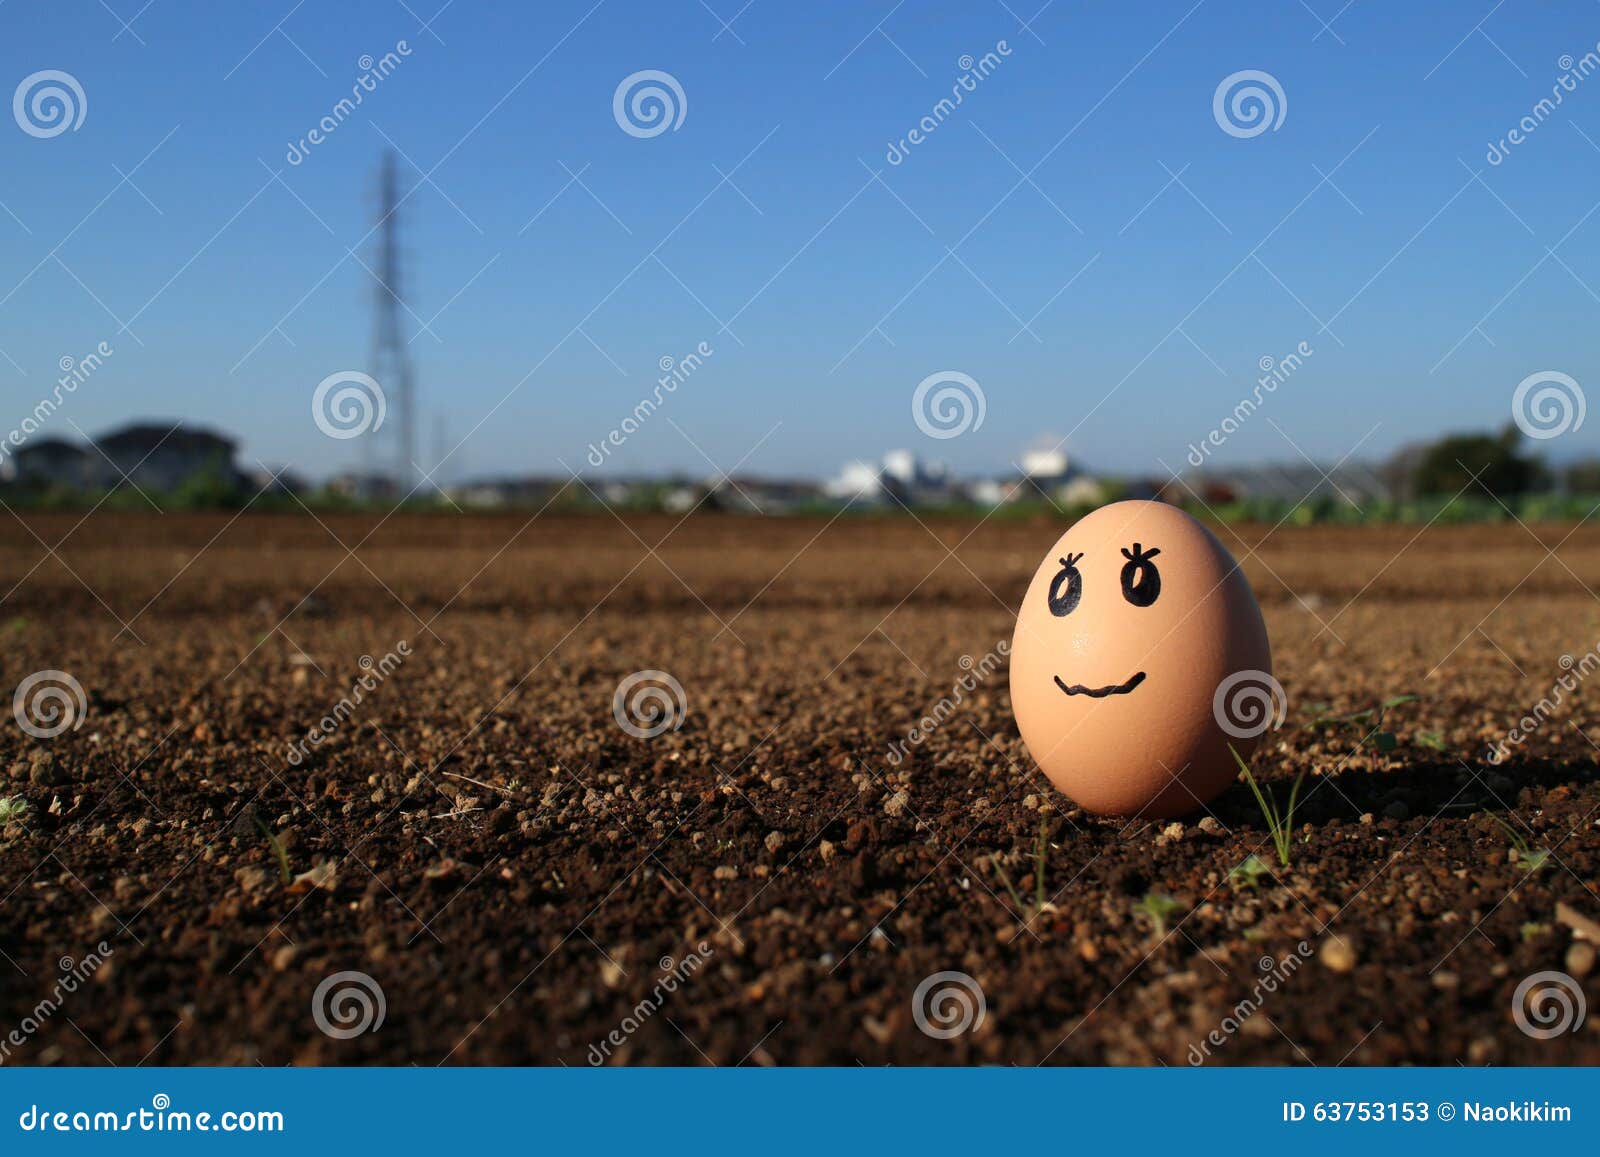 Thinking Egg Standing on the Soil Field Stock Image - Image of creativity,  isolated: 63753153